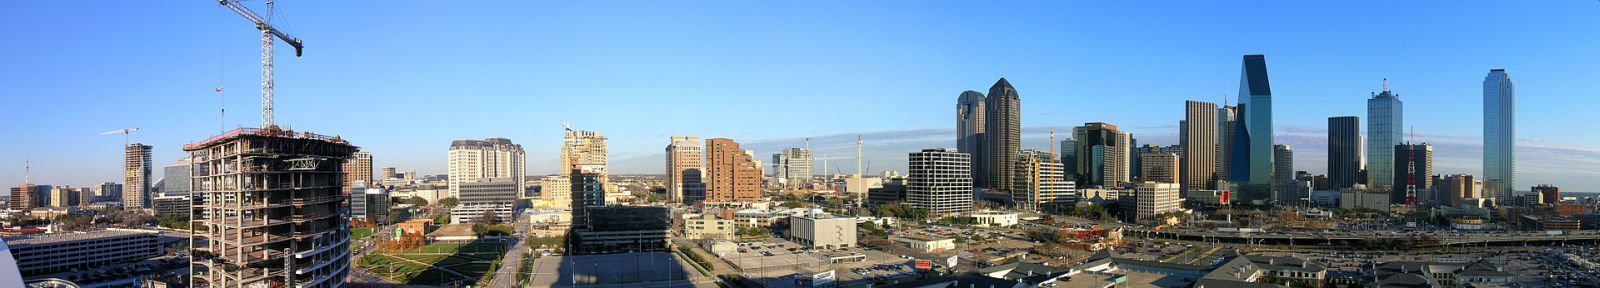 Panoramic view of downtown Dallas’ skyline from Dallas Victory Hotel in Victory Park